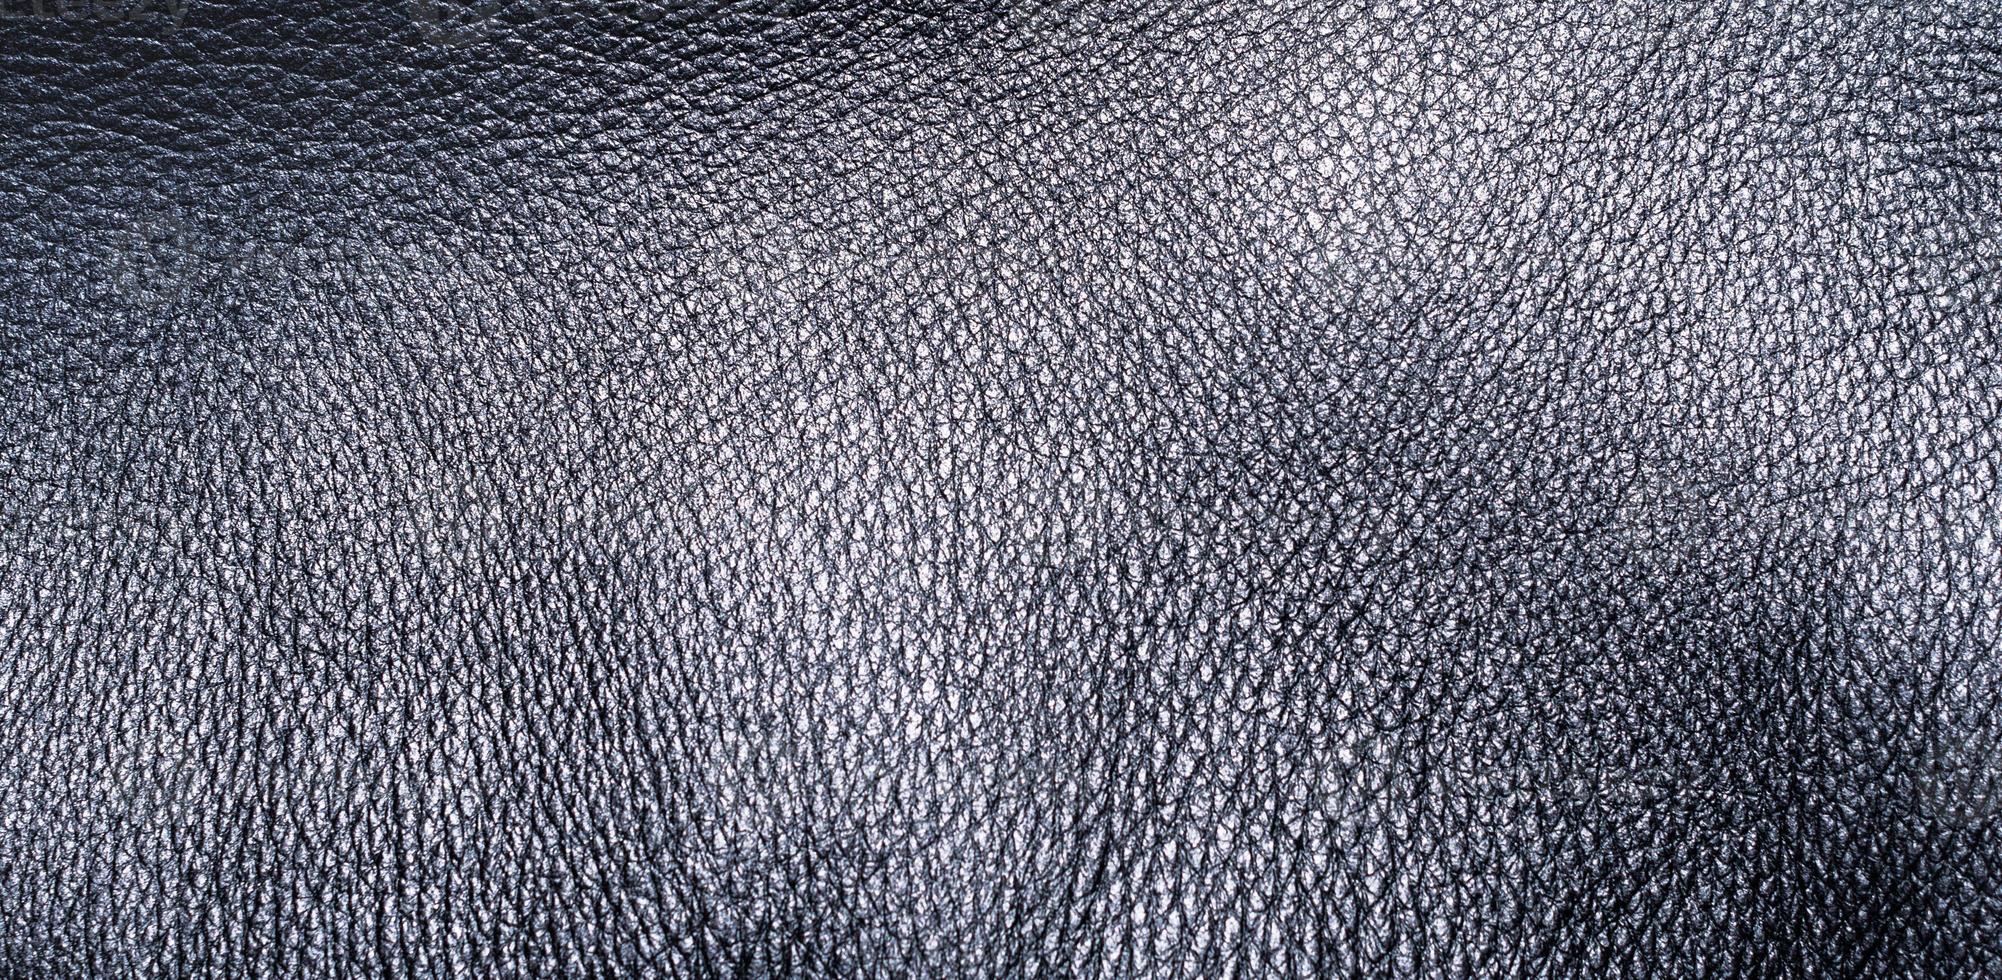 texture black natural leather photo